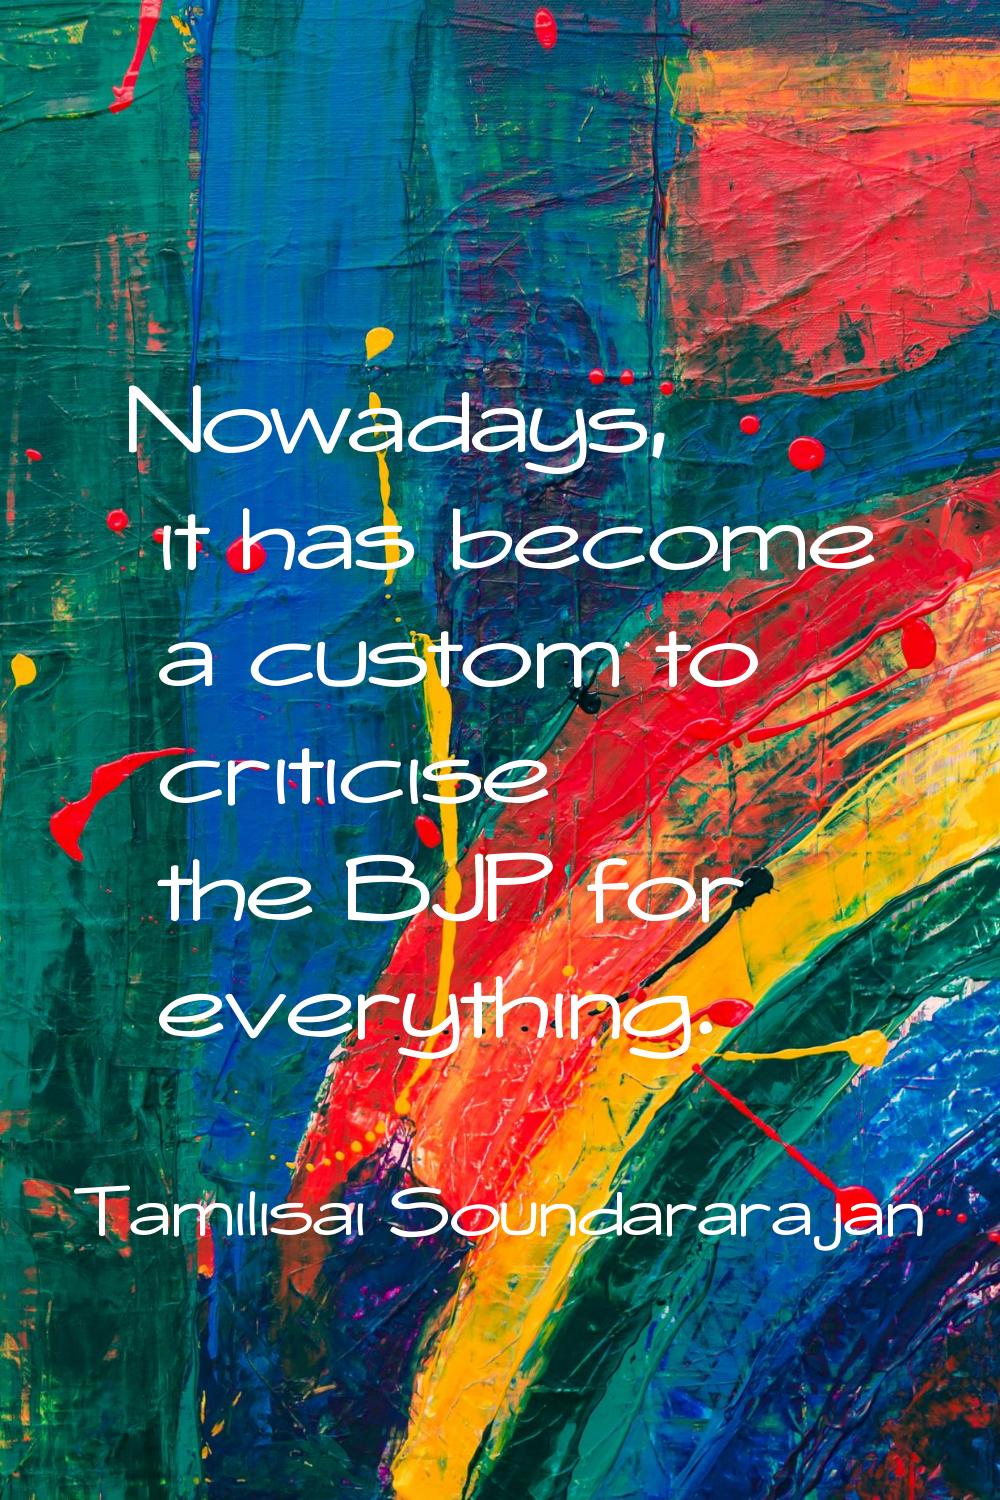 Nowadays, it has become a custom to criticise the BJP for everything.